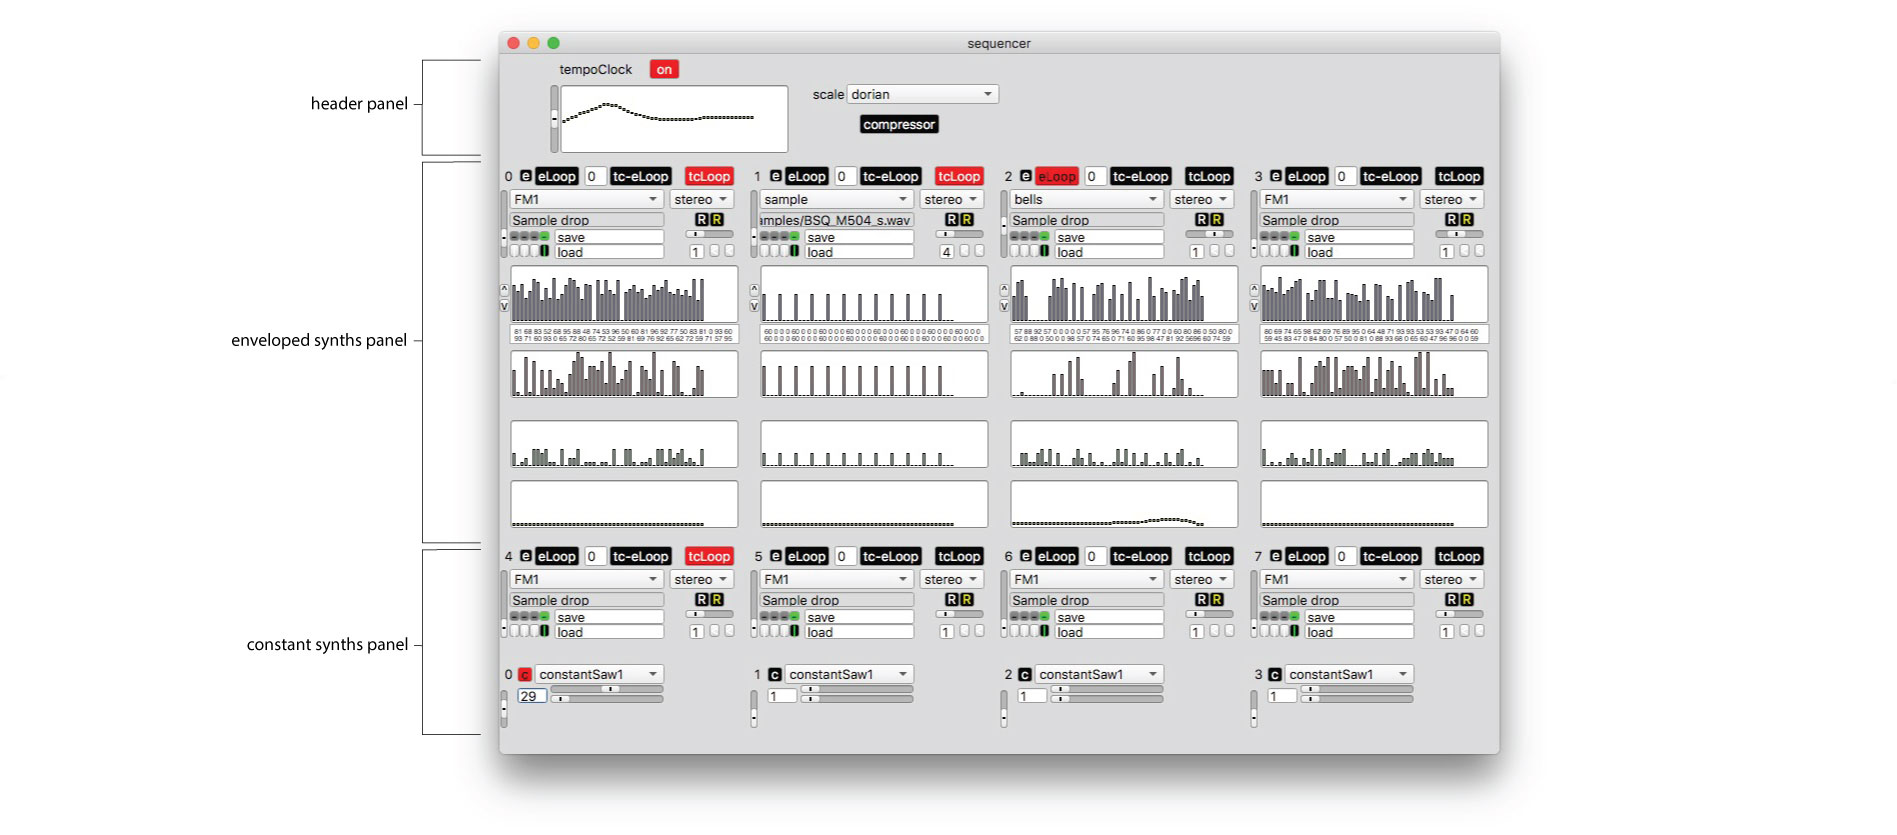 BCMI-1 sequencer GUI panels: header (top), enveloped synths (middle) and constant synths (bottom).